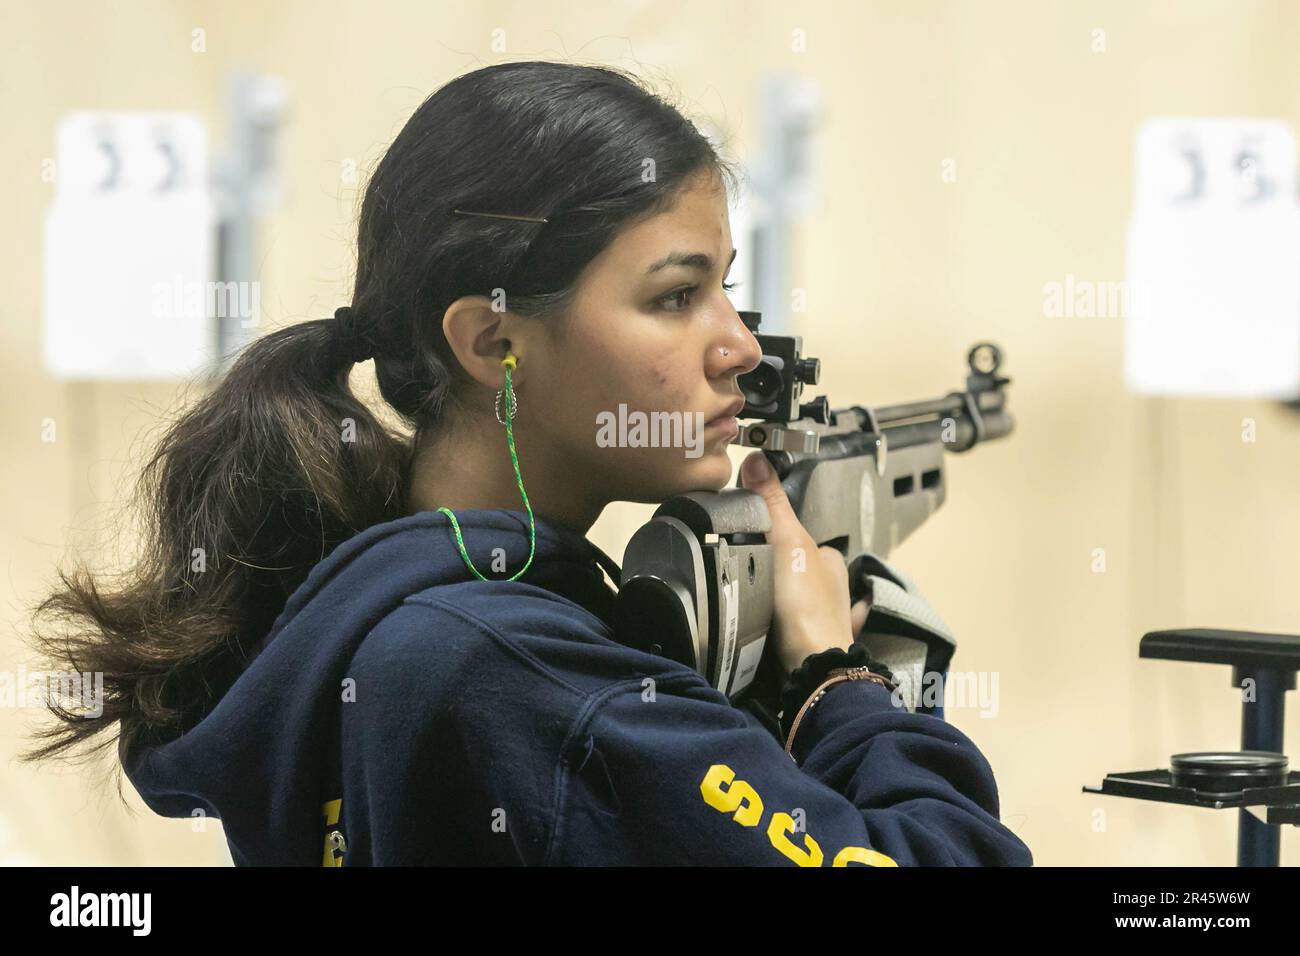 Jasmine Lopez, an Army JROTC Cadet from North Brunswick High School, takes a moment to mentally prepare before shooting at the 2023 JROTC National Air Rifle Championship on March 25 at Camp Perry, Ohio. The competition is held March 23-25 and features the best marksmen from all-service JROTC programs across the country competing in Sporter and Precision shooting events. | Photo by Sarah Windmueller, U.S. Army Cadet Command Public Affairs Stock Photo